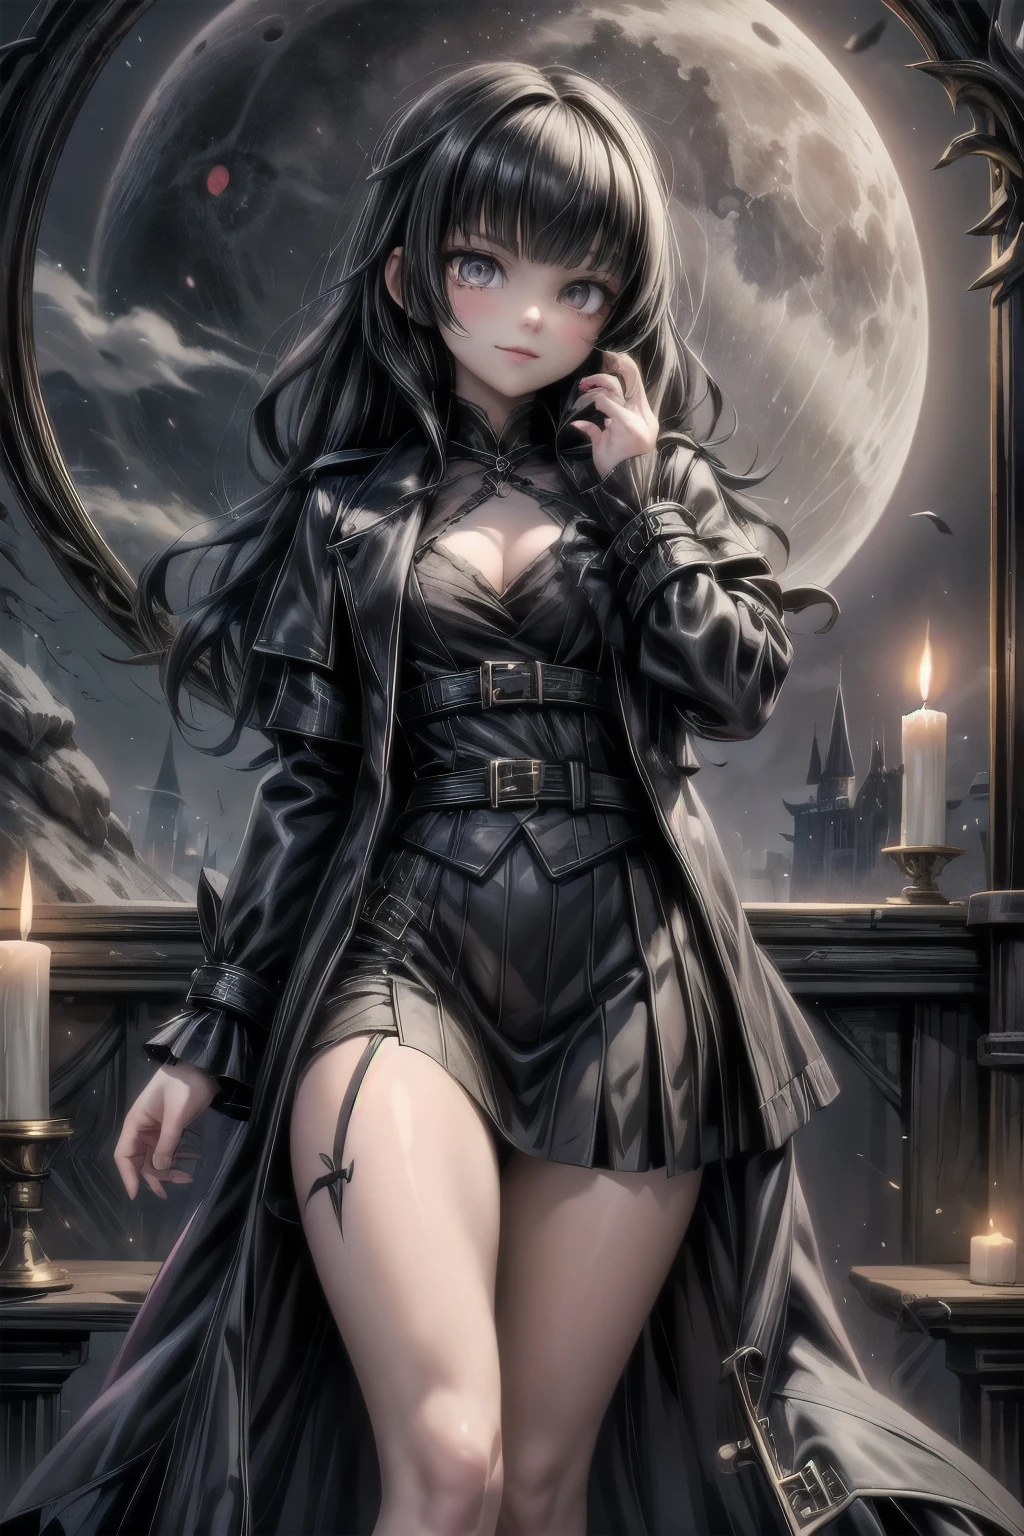 a vampire hunter girl wearing a Black Trench Coat and skirt, passing through a magical mirror, dark castle at night, castlevania art style, moon, lanterns and candles